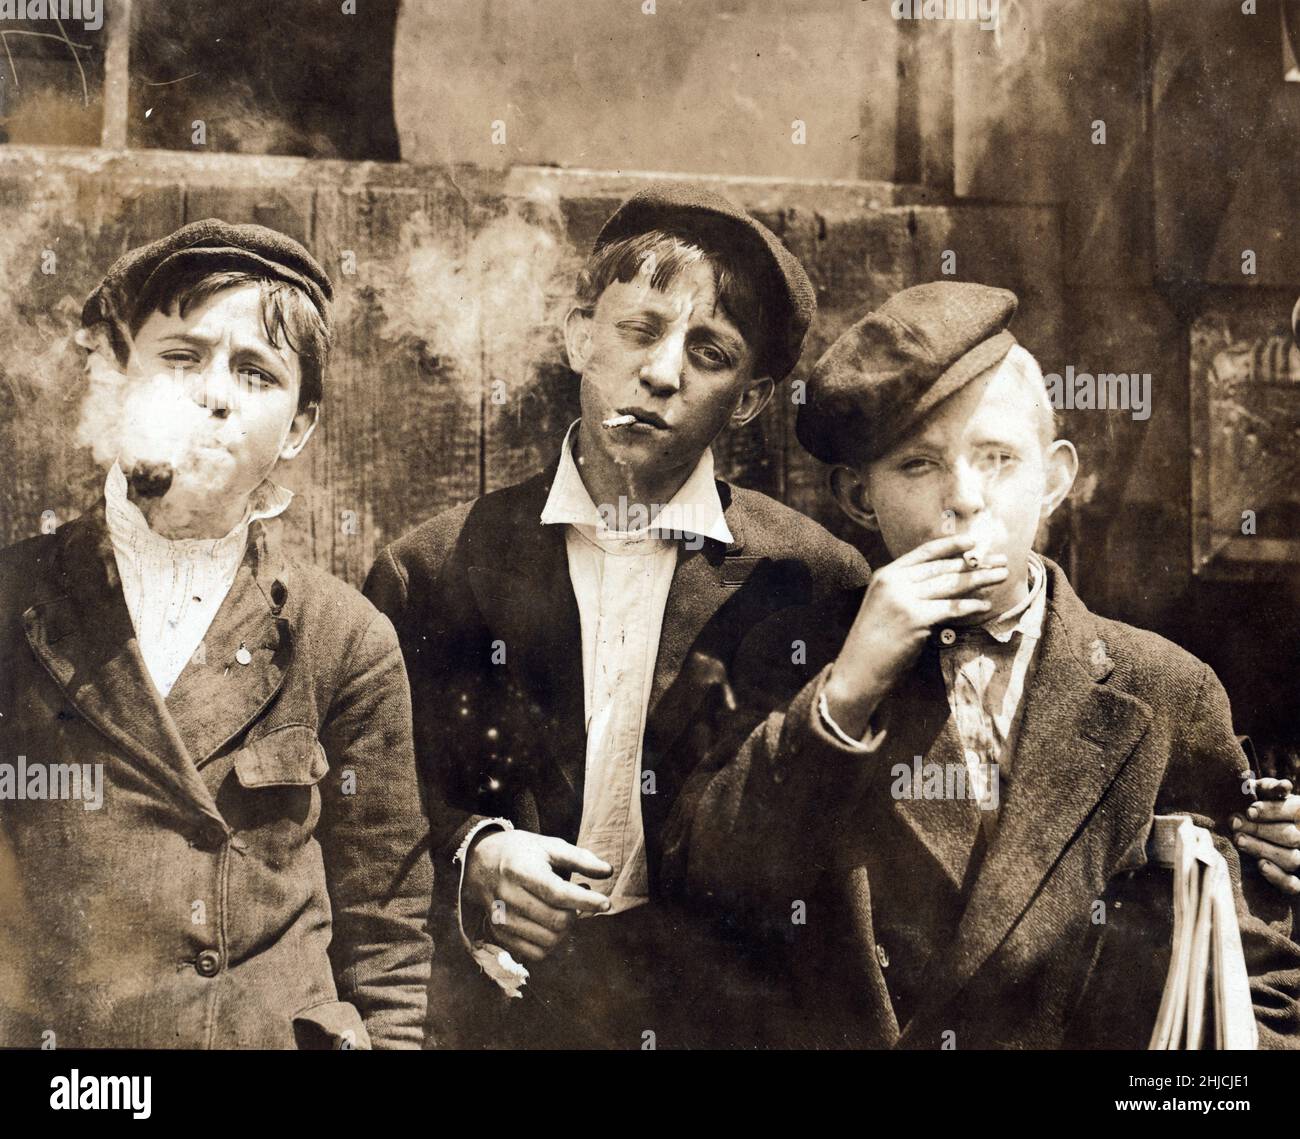 Newsies at Skeeter's Branch, on Jefferson near Franklin at 11:00 a.m. on Monday, May 9th, 1910. They were all smoking. Photographed by Lewis Hine in St. Louis, Missouri. Stock Photo